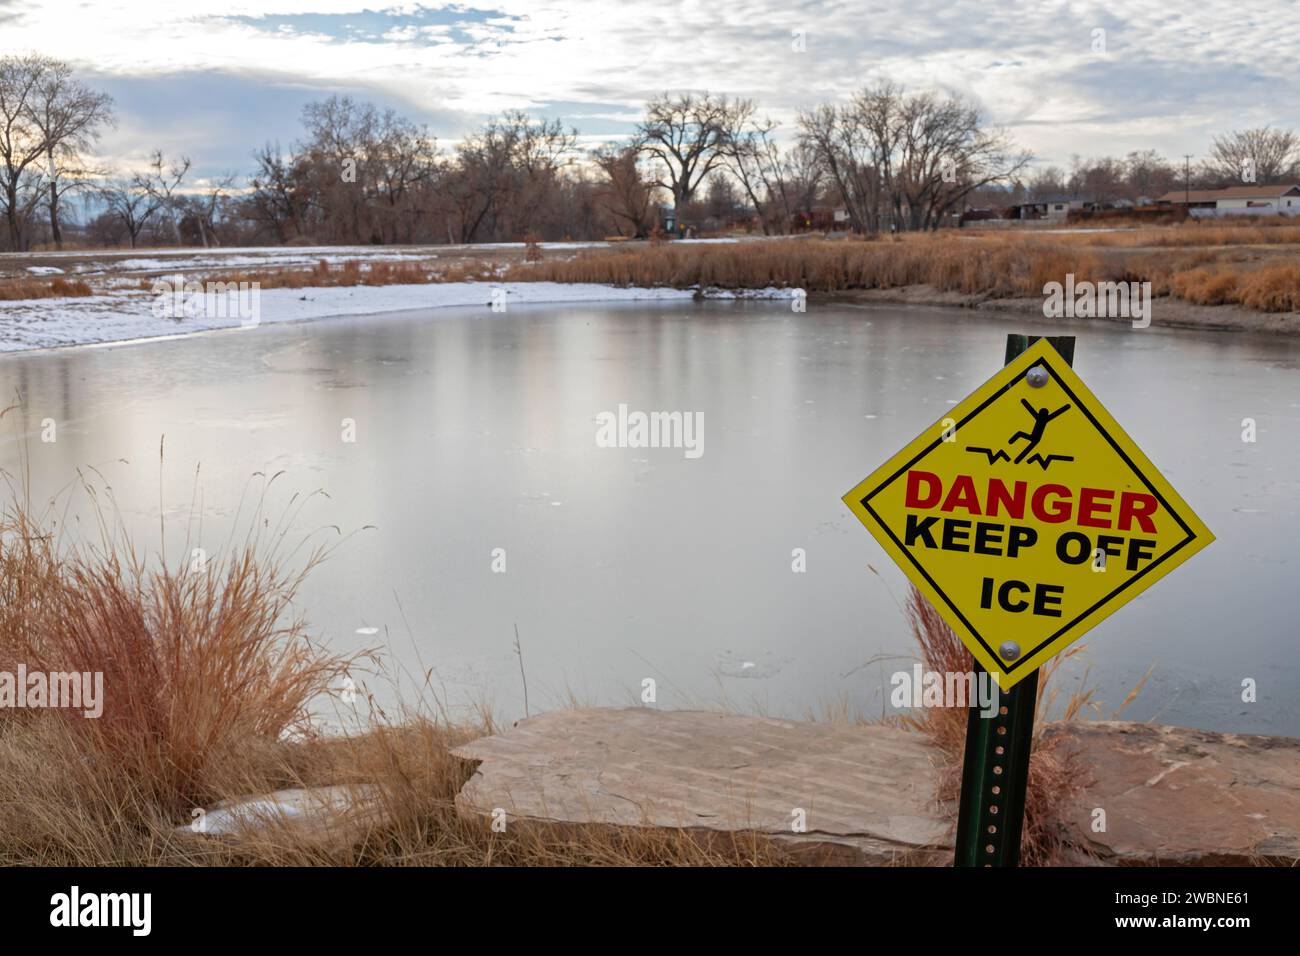 Denver, Colorado - A sign warns of thin ice on a pond along the Clear Creek Trail. The hiking/biking trail runs 19 miles from Golden, Colorado to the Stock Photo